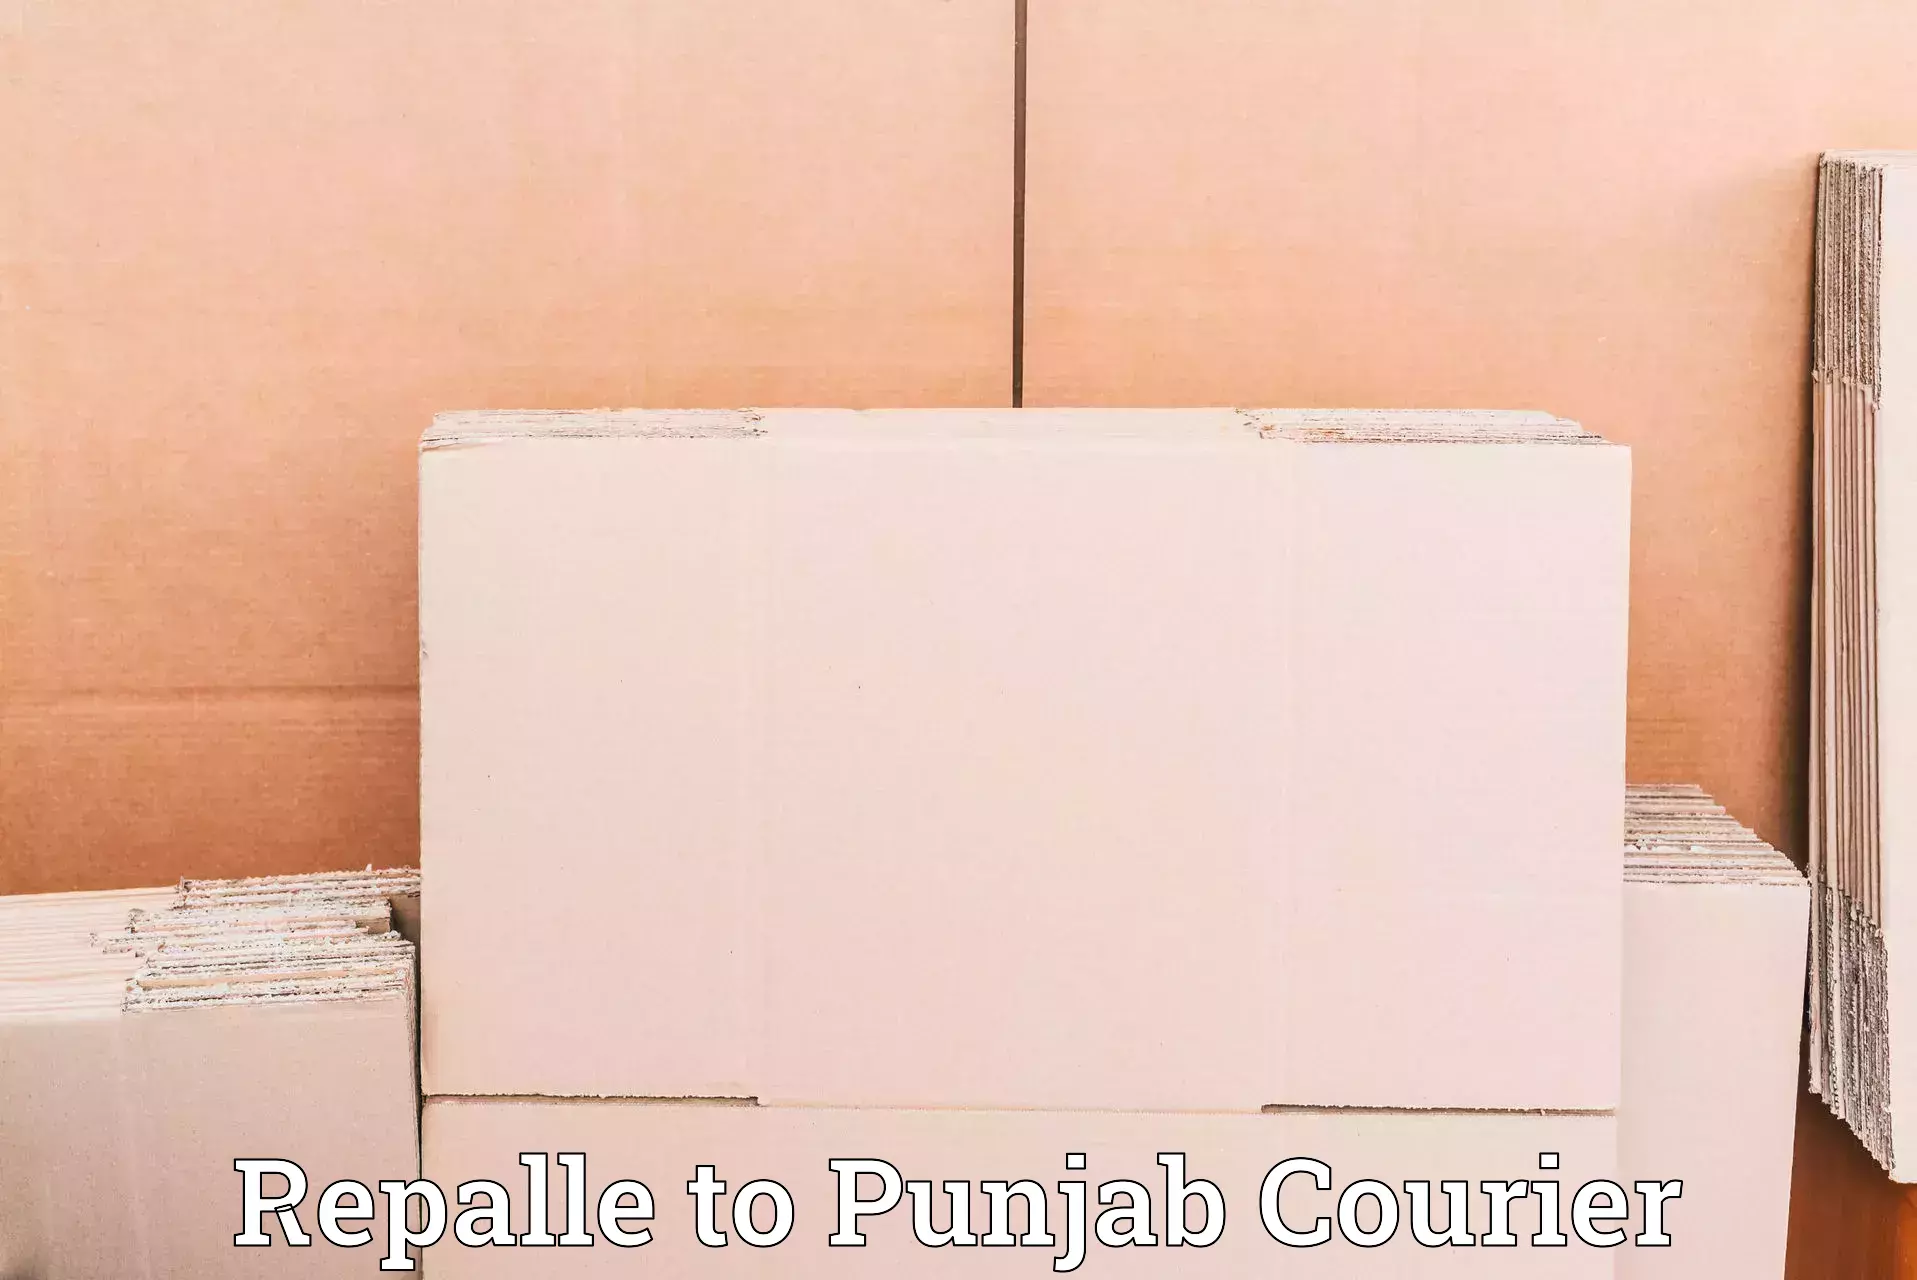 High-capacity courier solutions Repalle to Patiala